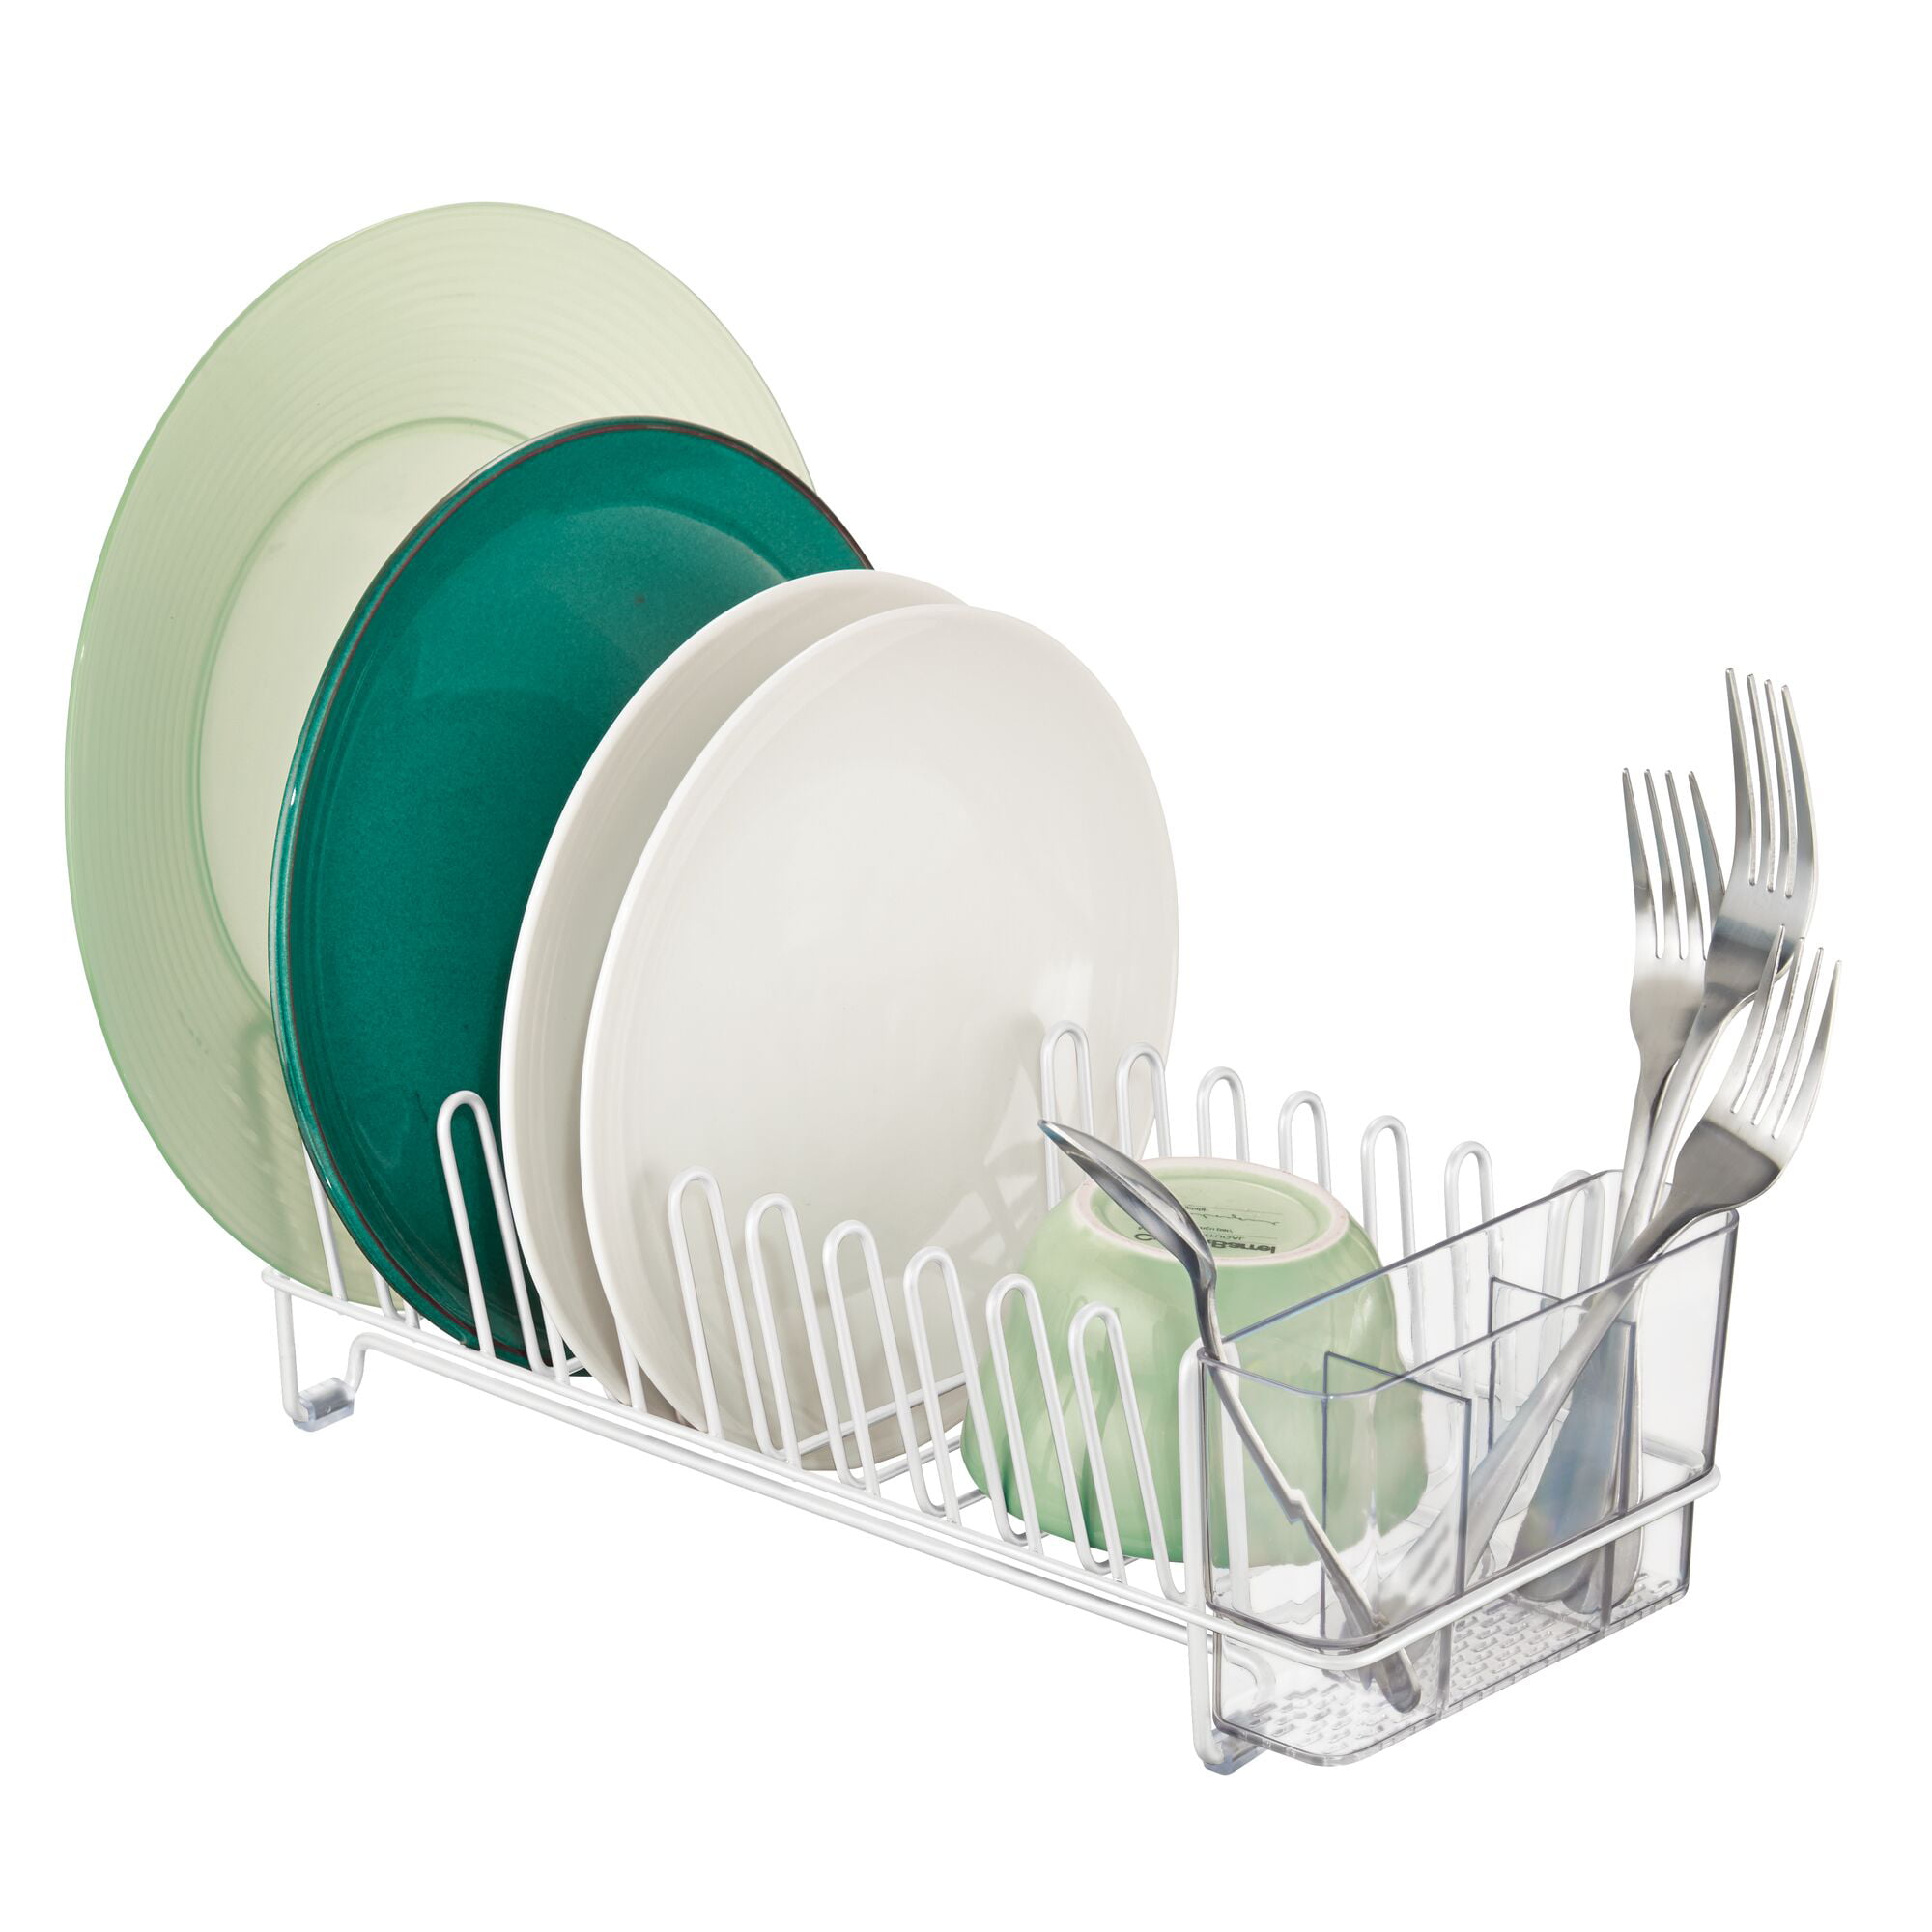 Navaris Dish Drainer Rack - Plate, Cutlery, Pots and Pans Drying Rack for Kitchen - Modern Retro Design Drip Tray with Metal Rack - White